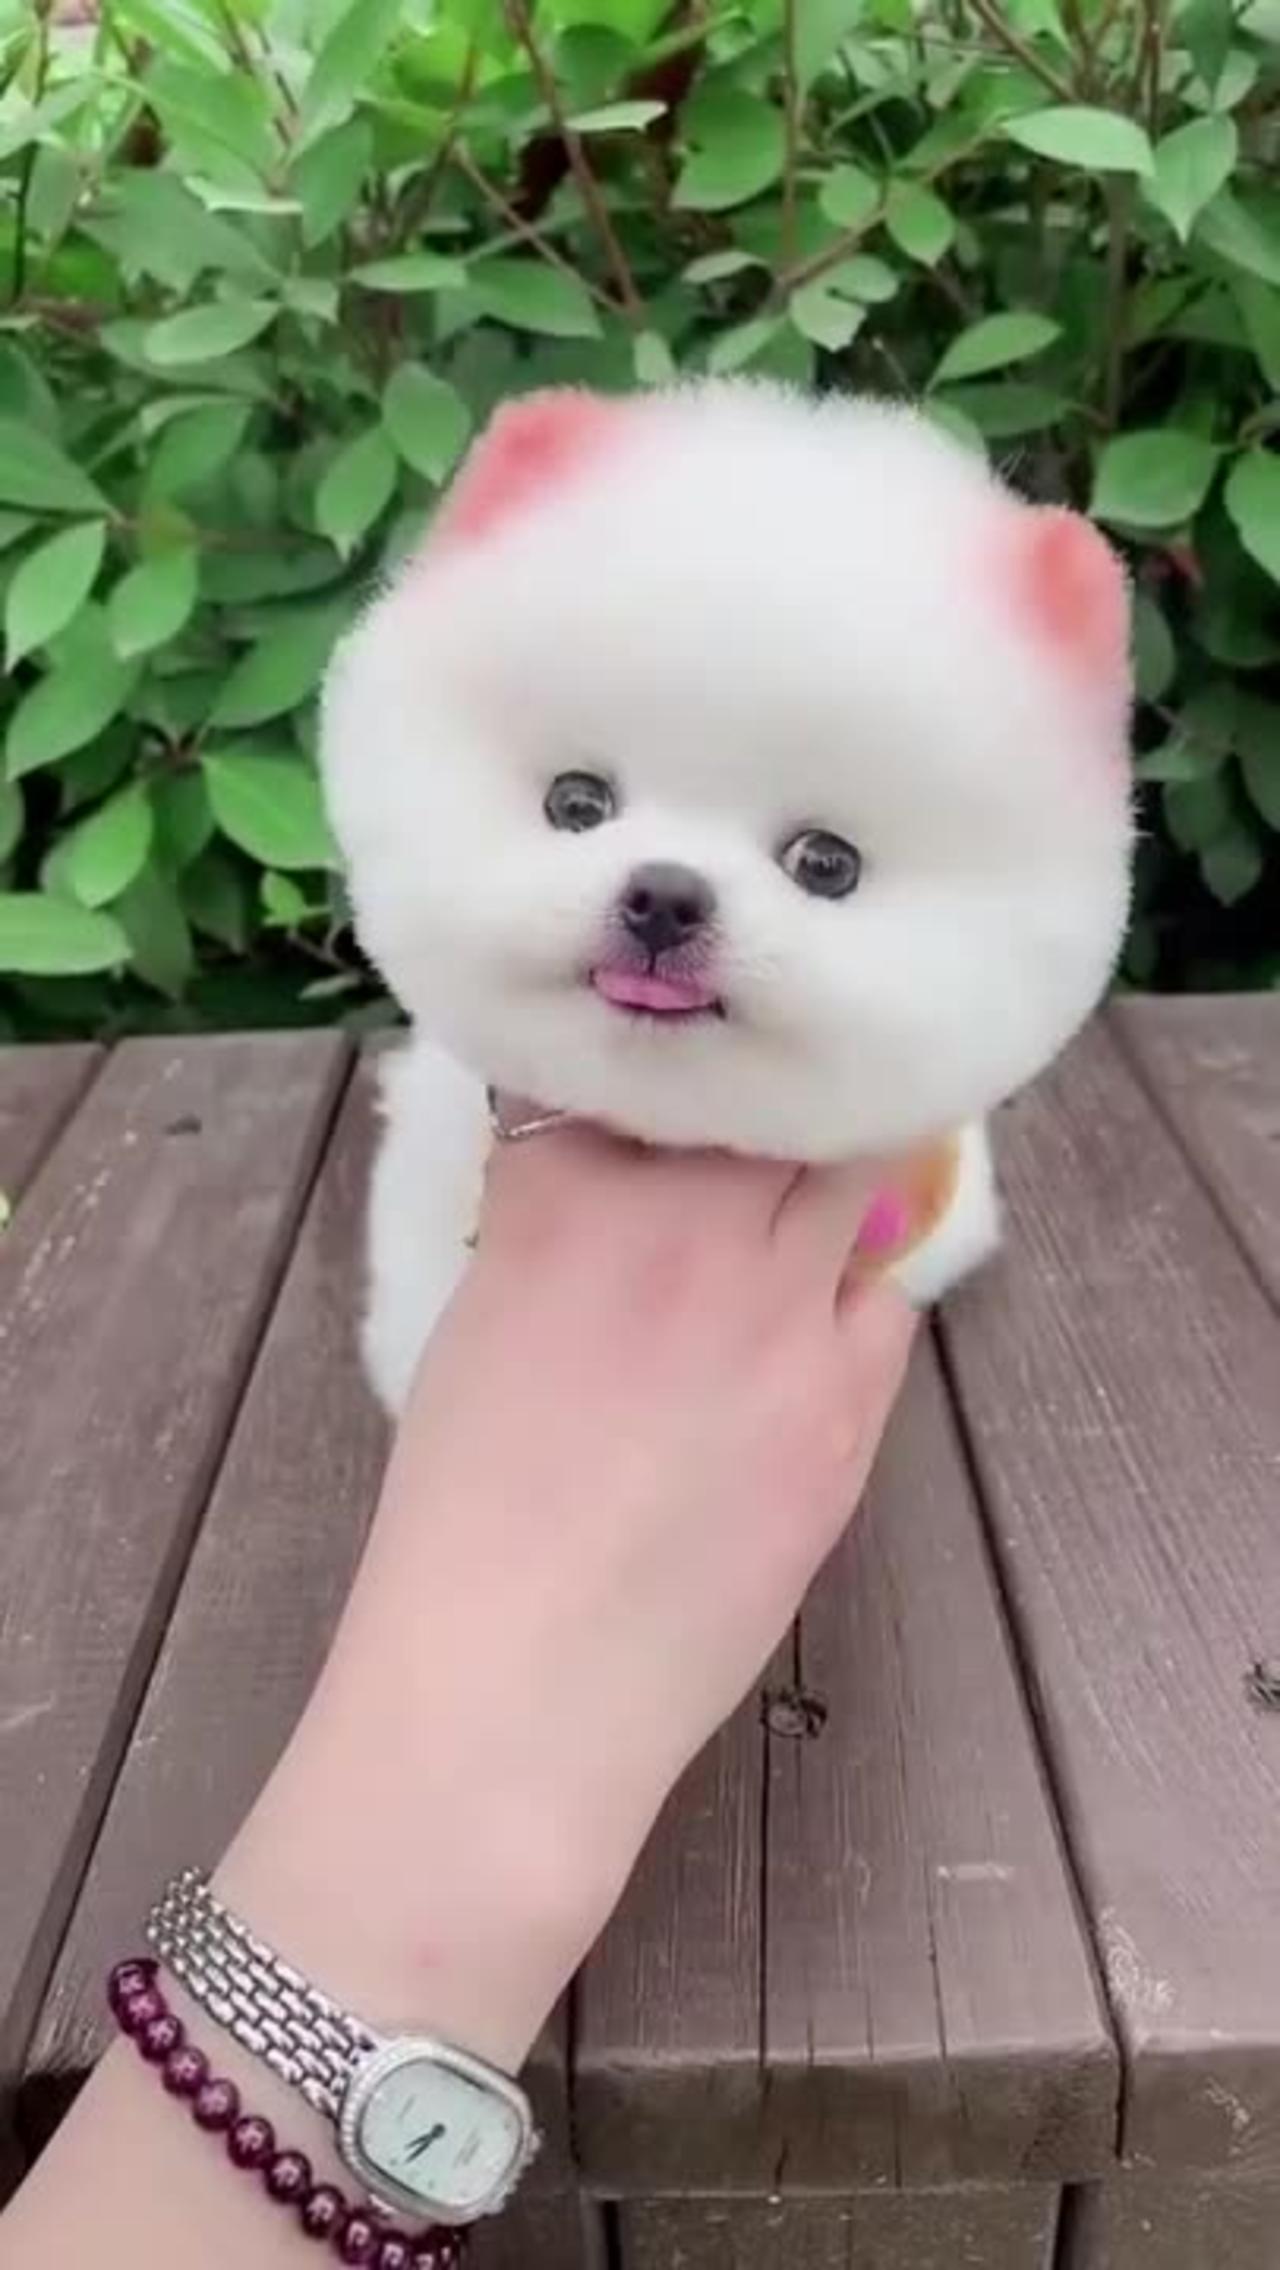 Top Funny Cute Dog Videos and TIKTOK Compilation